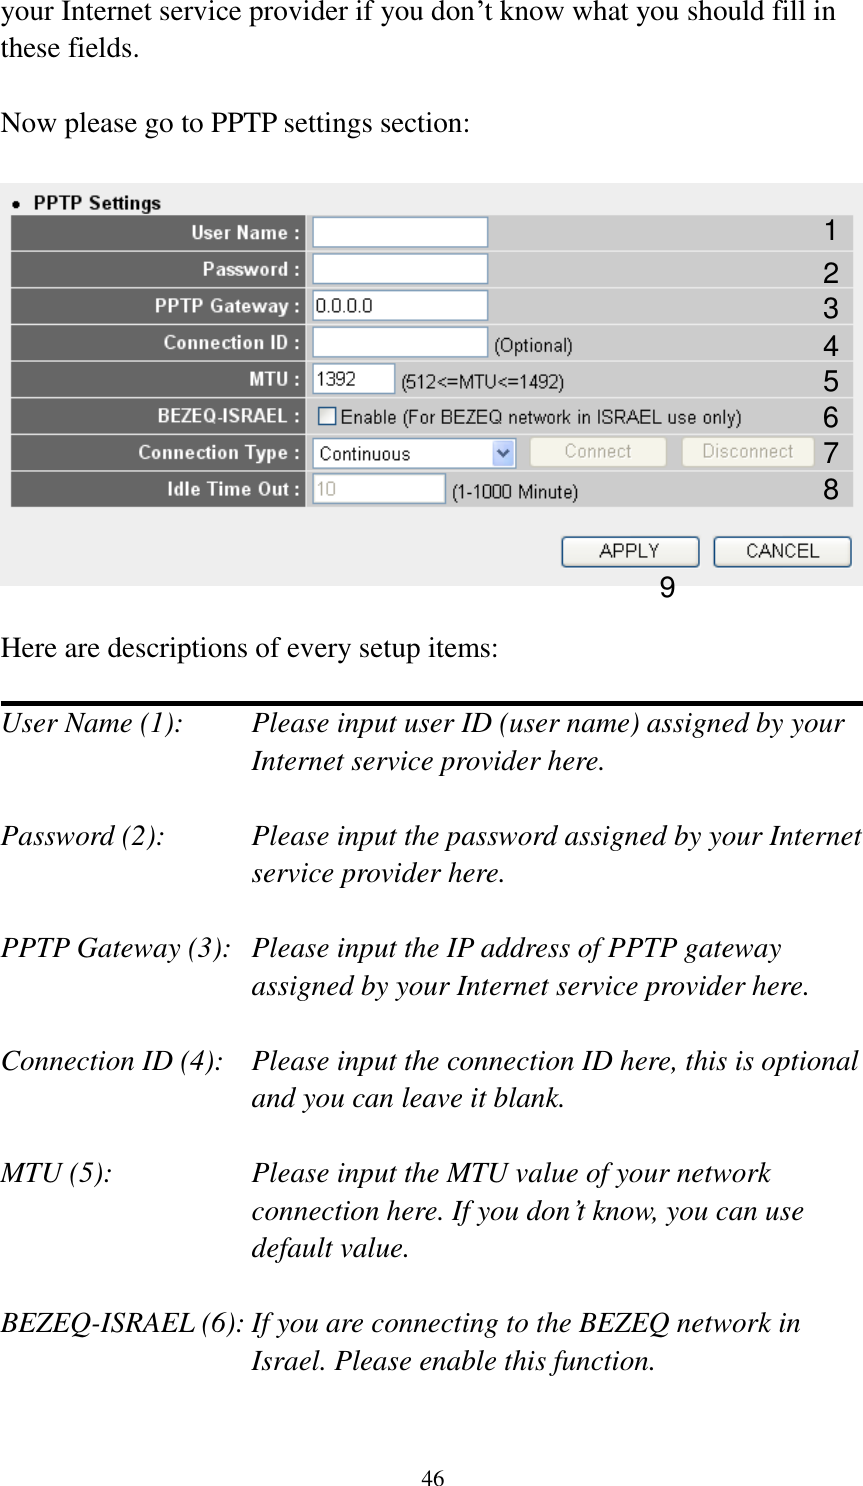 46 your Internet service provider if you don‟t know what you should fill in these fields.  Now please go to PPTP settings section:    Here are descriptions of every setup items:  User Name (1):    Please input user ID (user name) assigned by your Internet service provider here.  Password (2):    Please input the password assigned by your Internet service provider here.  PPTP Gateway (3):   Please input the IP address of PPTP gateway assigned by your Internet service provider here.  Connection ID (4):    Please input the connection ID here, this is optional and you can leave it blank.  MTU (5):    Please input the MTU value of your network connection here. If you don‟t know, you can use default value.  BEZEQ-ISRAEL (6): If you are connecting to the BEZEQ network in Israel. Please enable this function.  1 2 3 4 5 7 8 9 6 